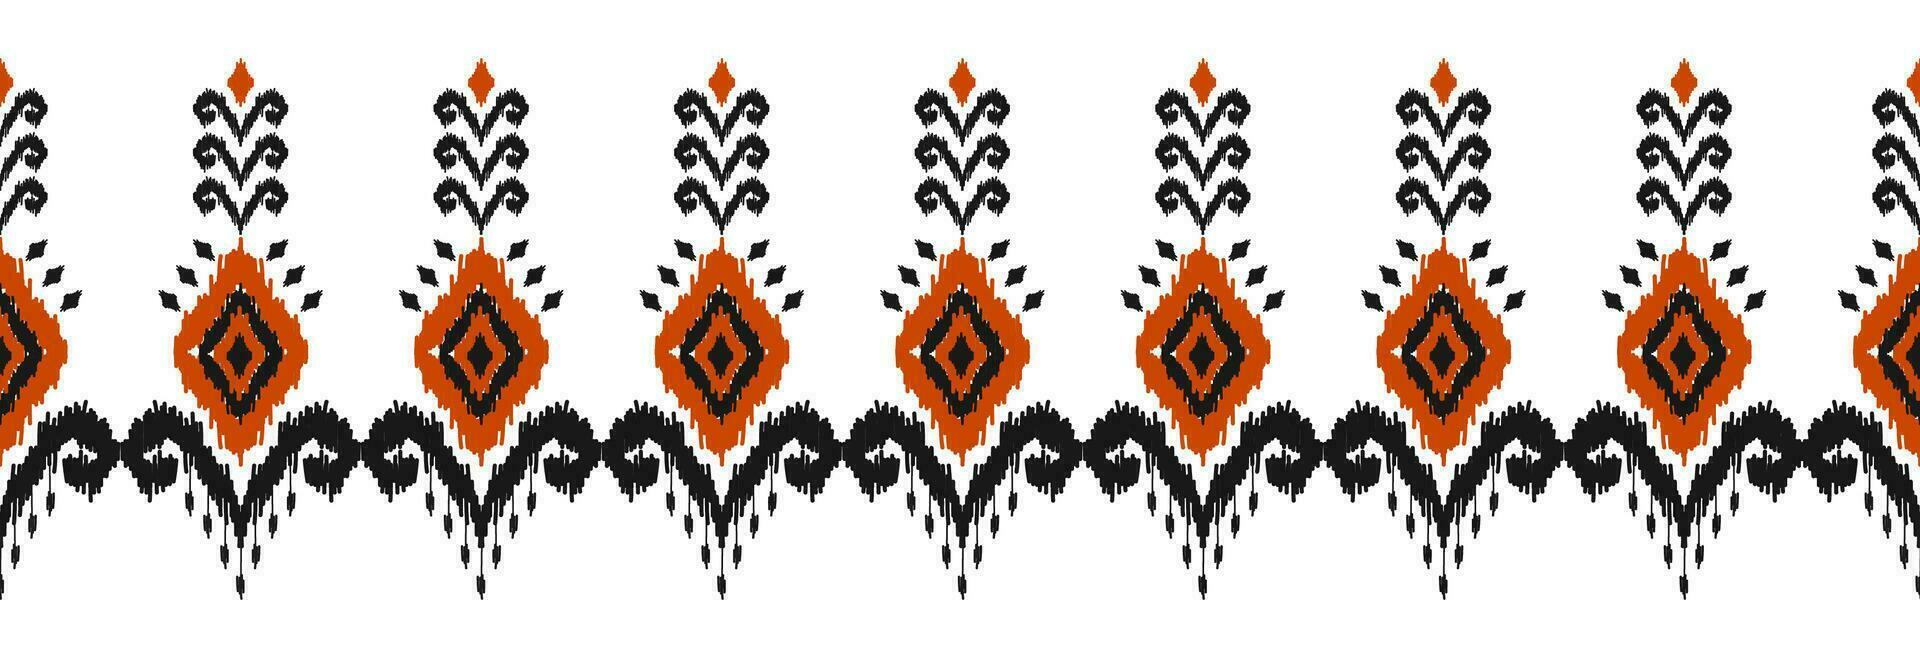 Border ethnic ikat pattern art. folk embroidery, and Mexican style. Aztec geometric ornament print. Design for background, illustration, fabric, clothing, textile, print, batik. vector